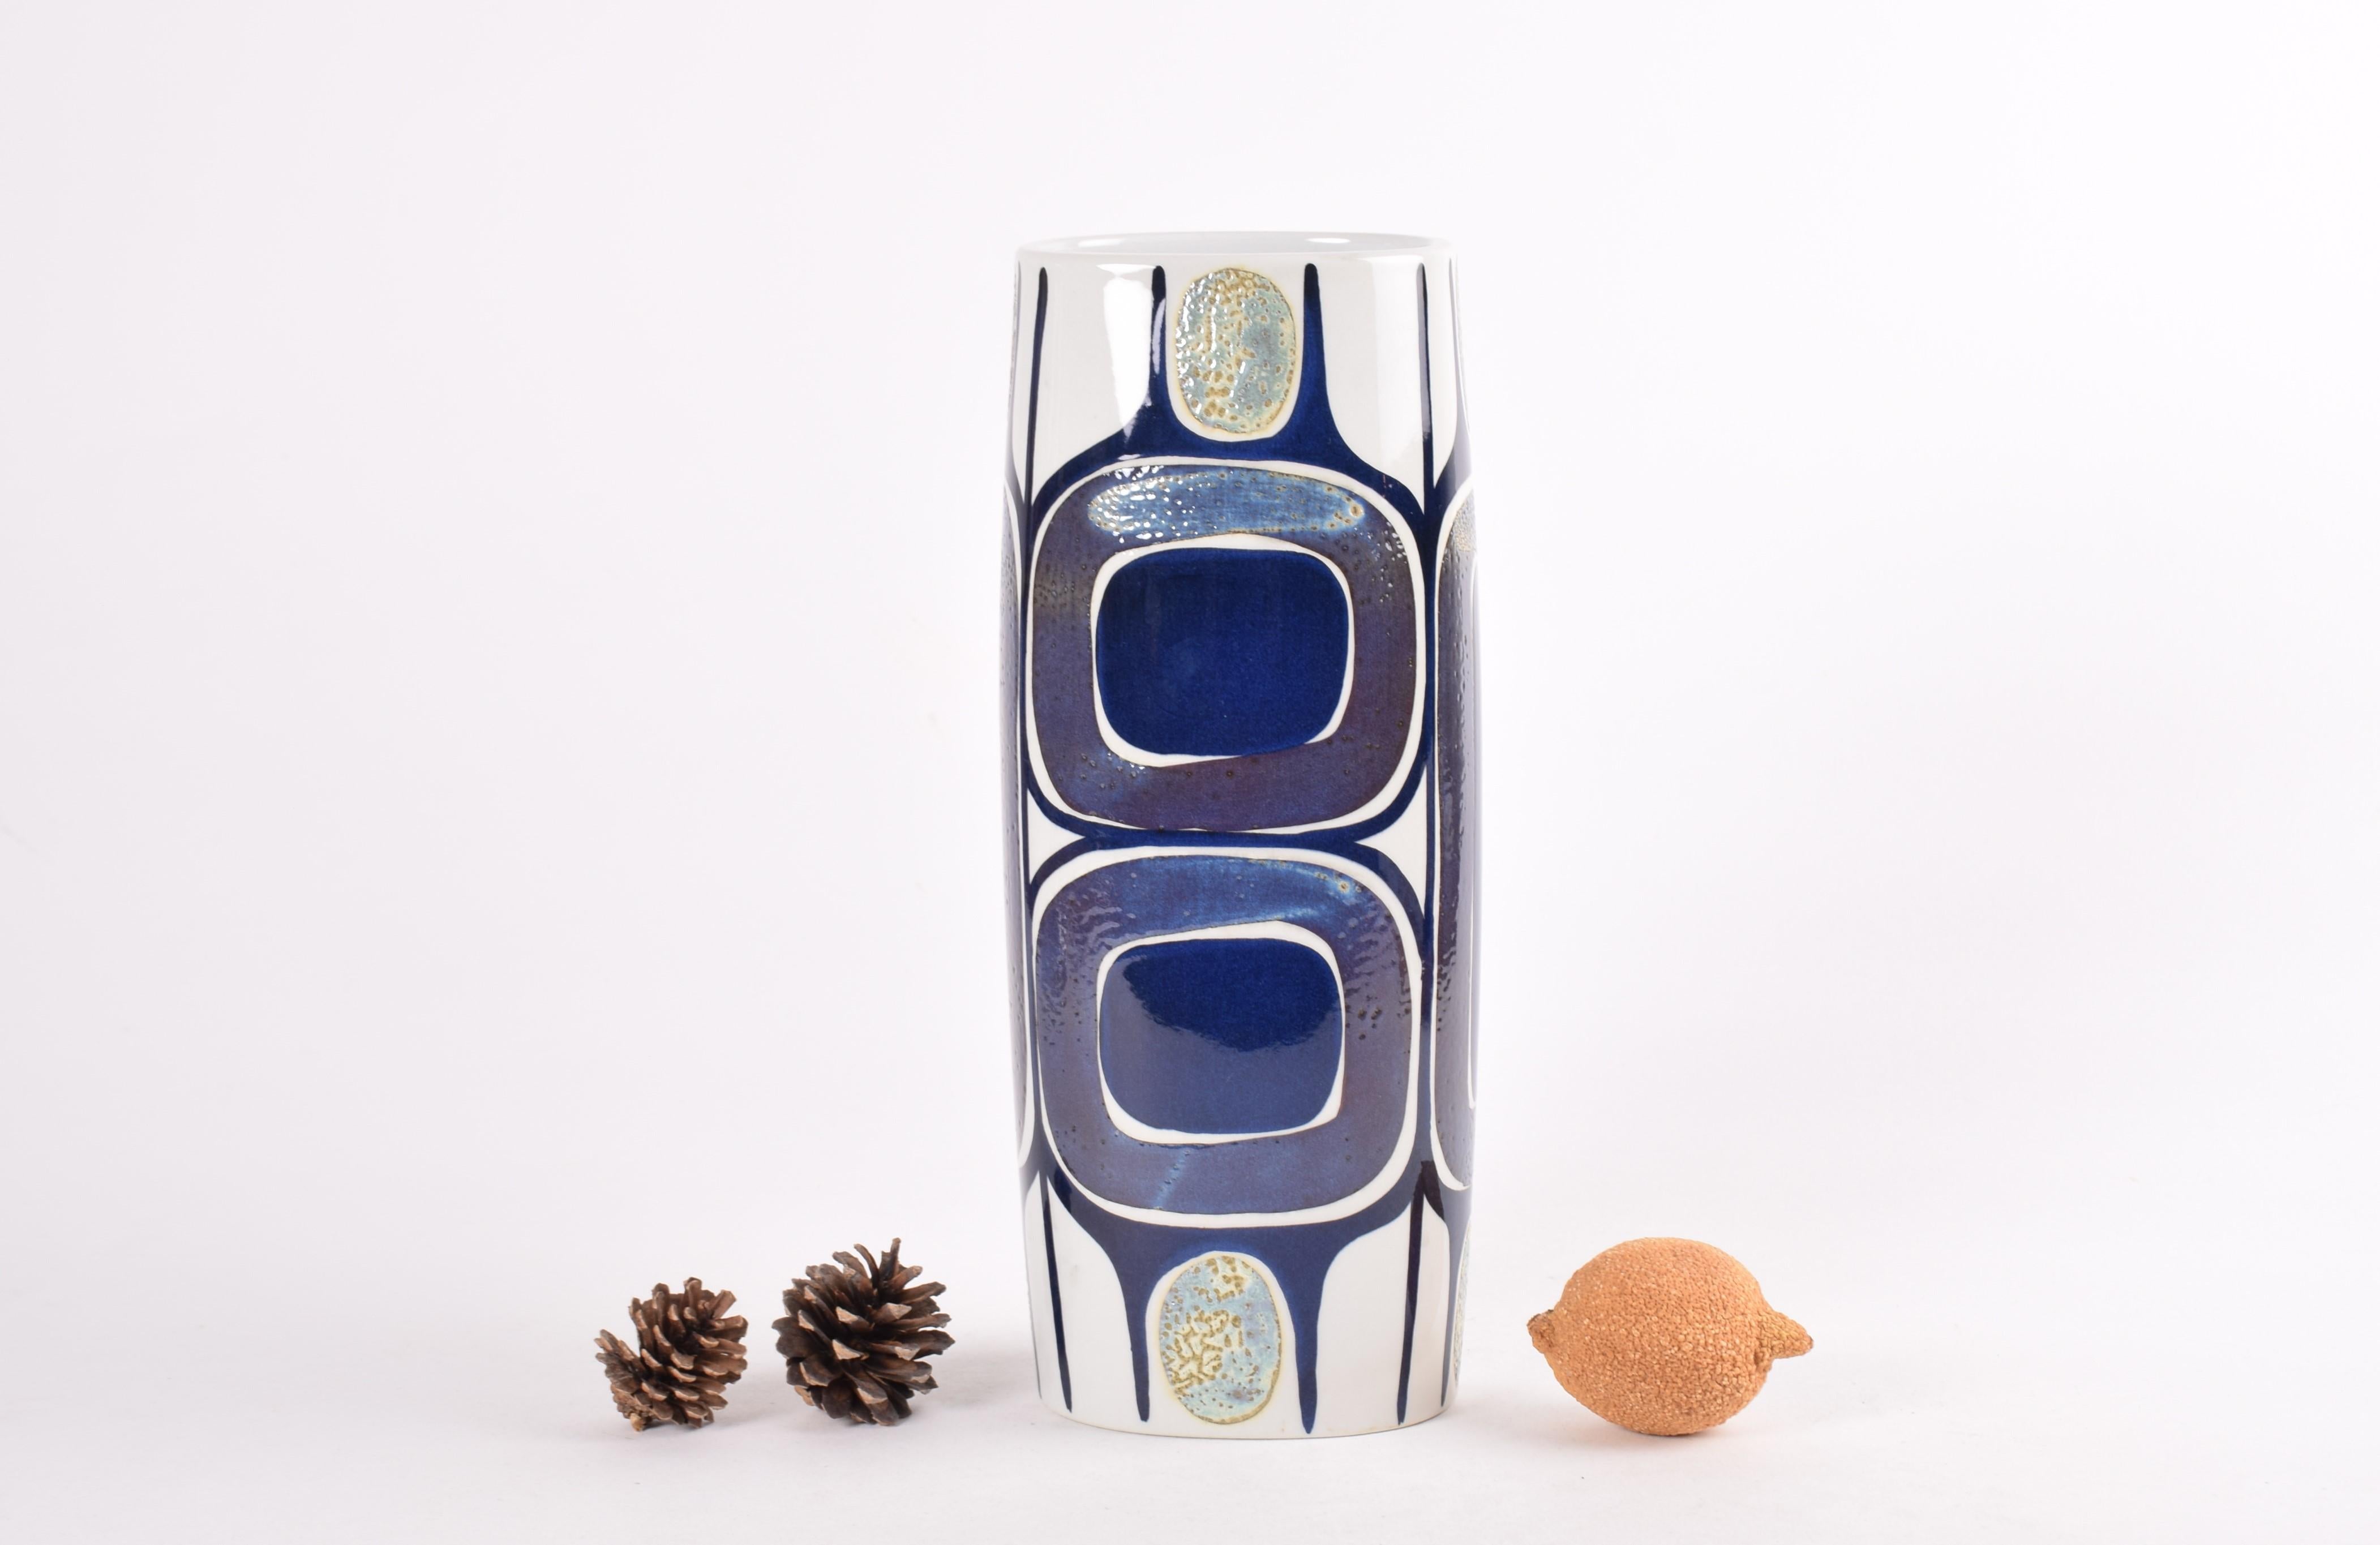 Tall and eye-catching vase from the Royal Copenhagen Tenera series.
The bold hand painted decor is designed by Inge-Lise Koefoed.
The colors are blue and purple and shimmering pale yellow or gold on white.

The vase was manufactured in the period